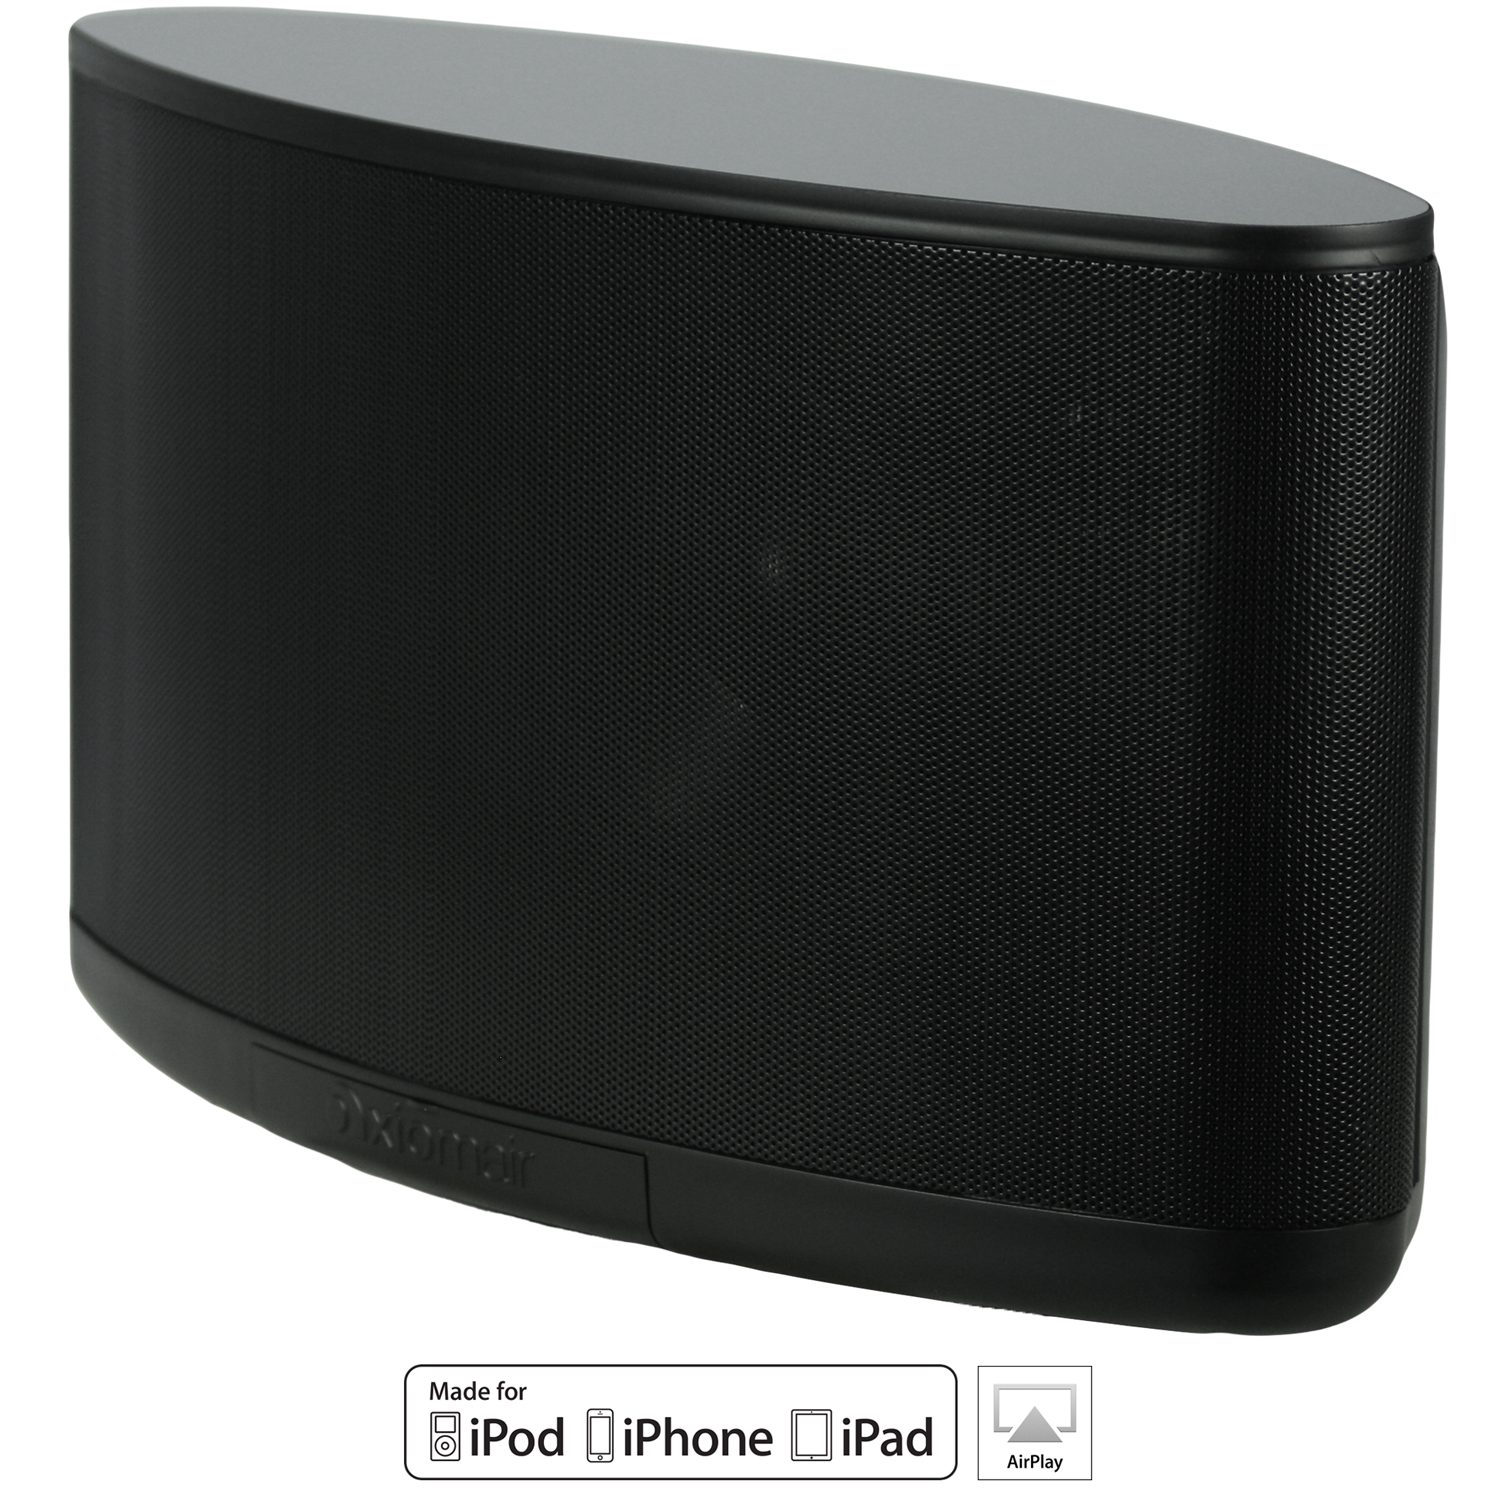 AxiomAir Portable Wireless Wifi Speaker - Black with Microphone Inputs and 9 Hour Battery